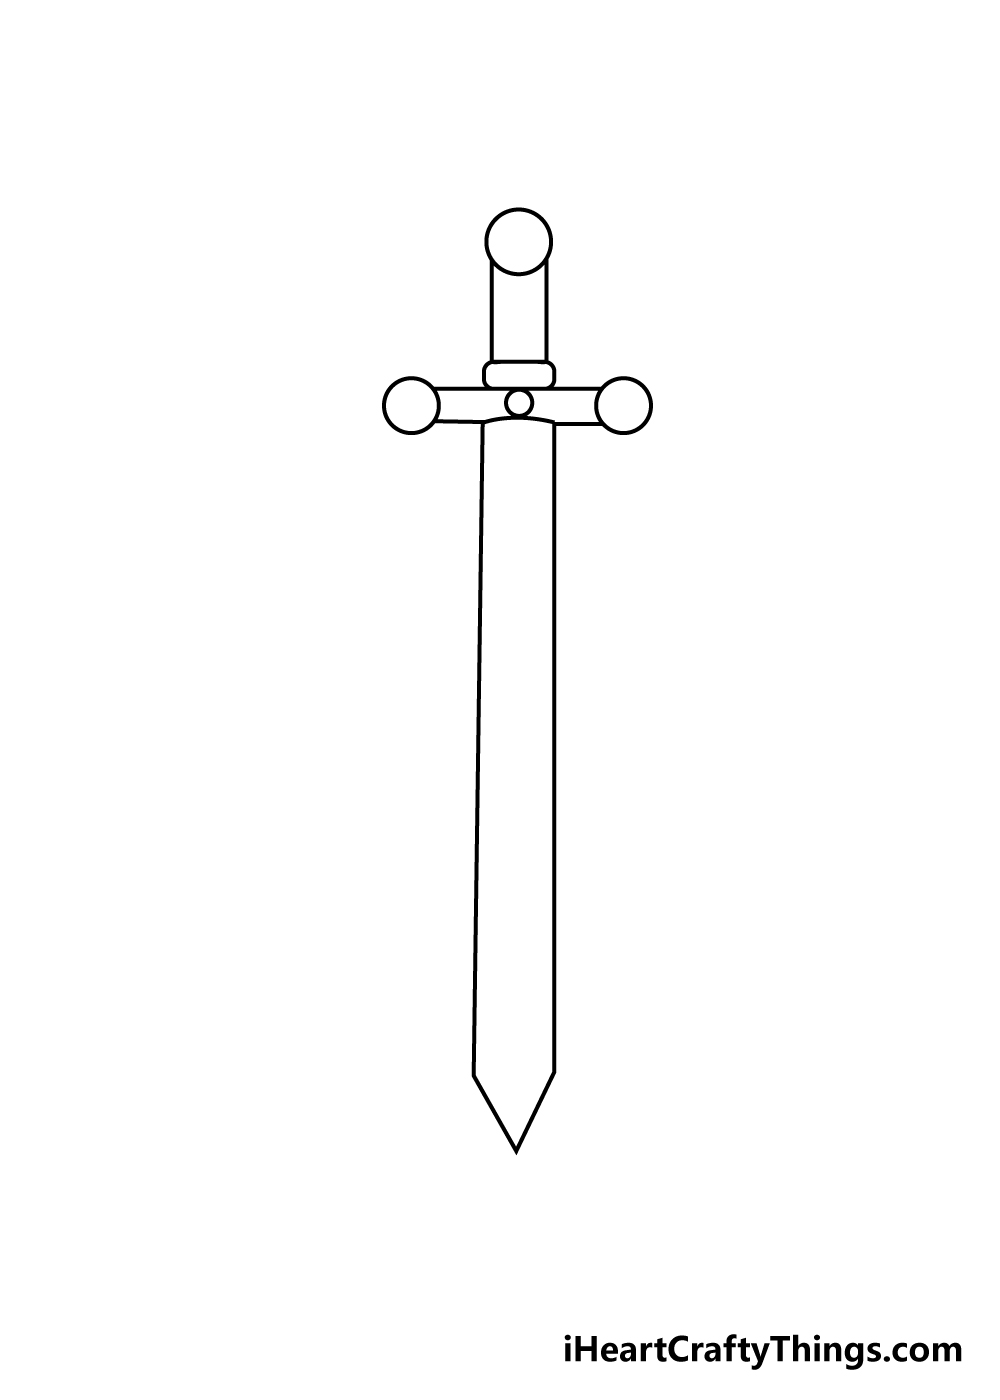 Sword Drawing - How To Draw A Sword Step By Step